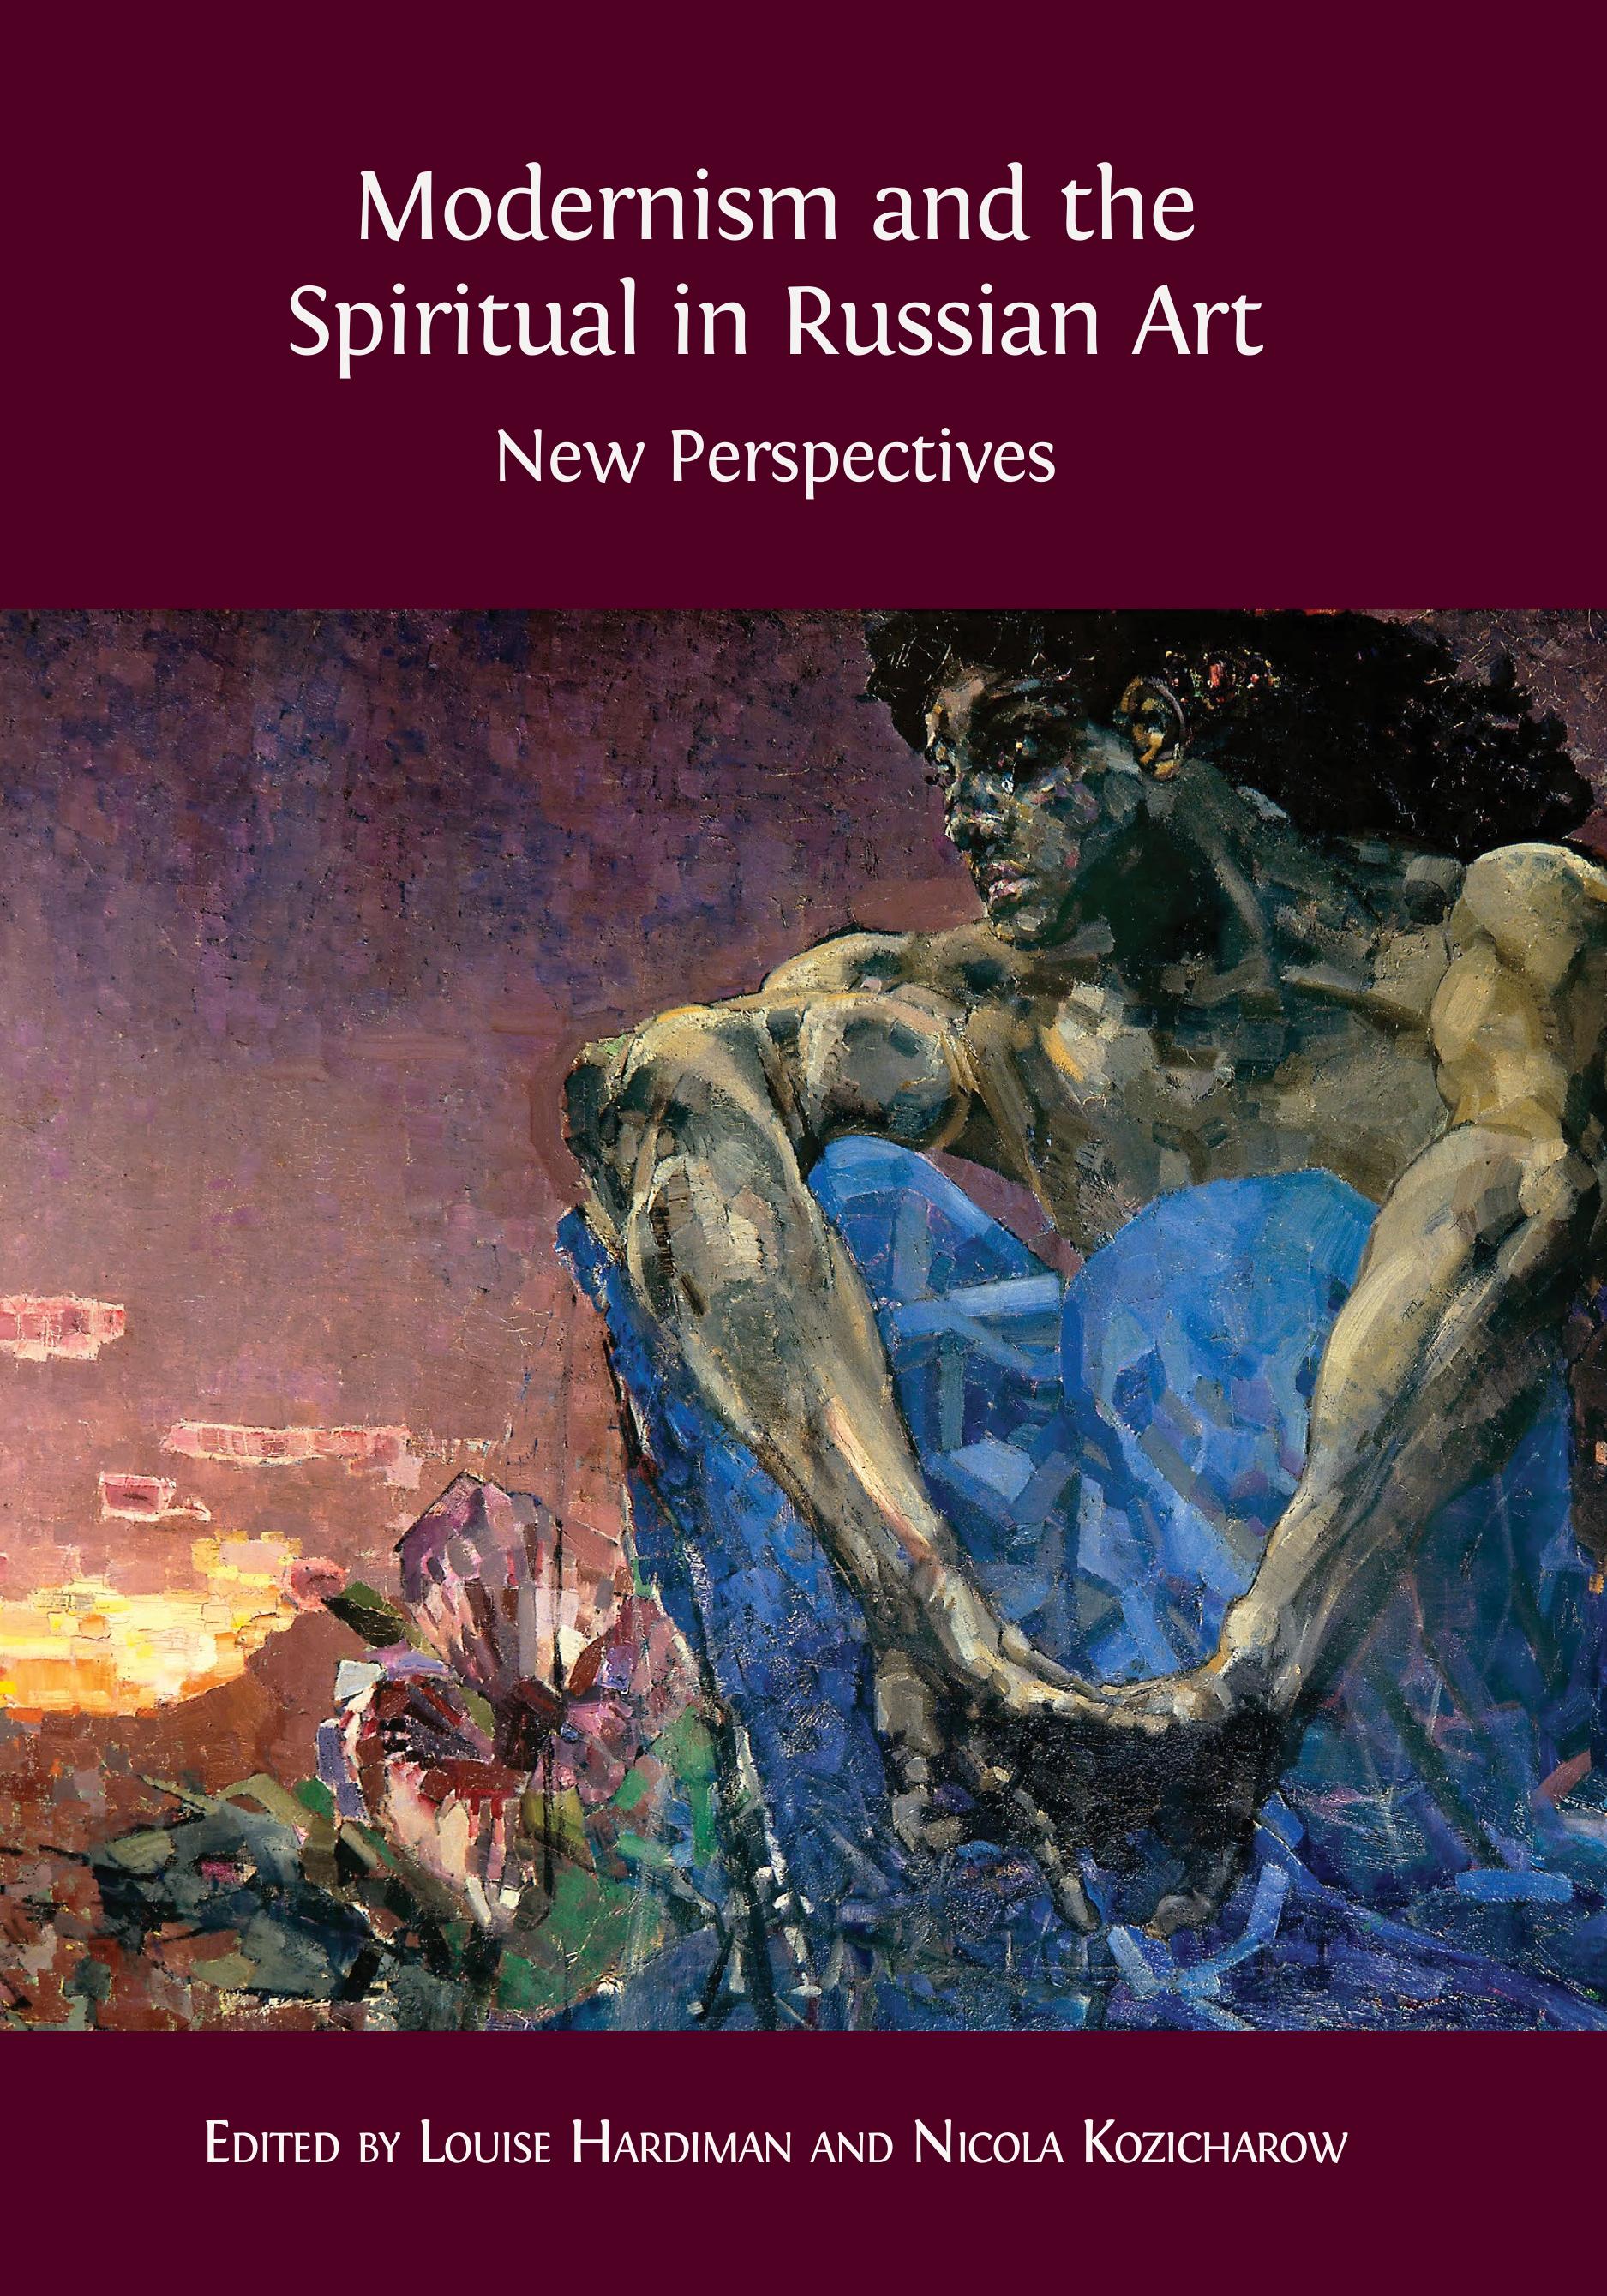 Modernism and the Spiritual in Russian Art: New Perspectives